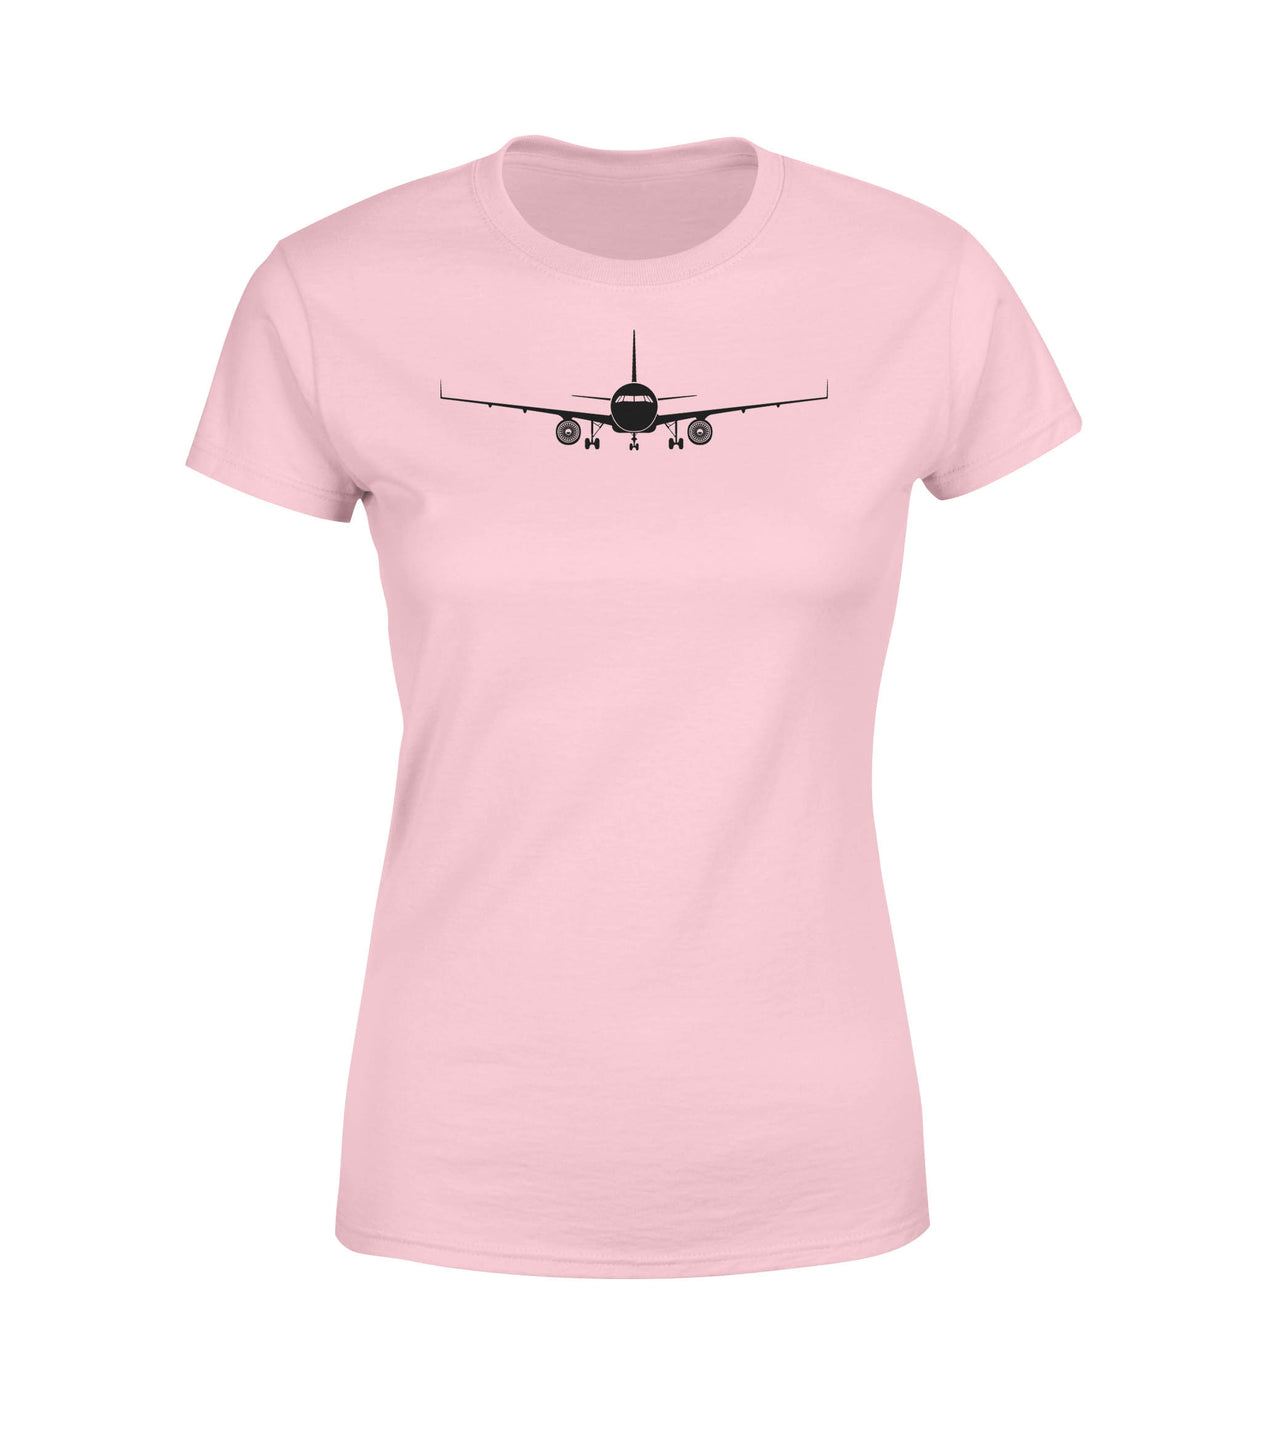 Airbus A320 Silhouette Designed Women T-Shirts